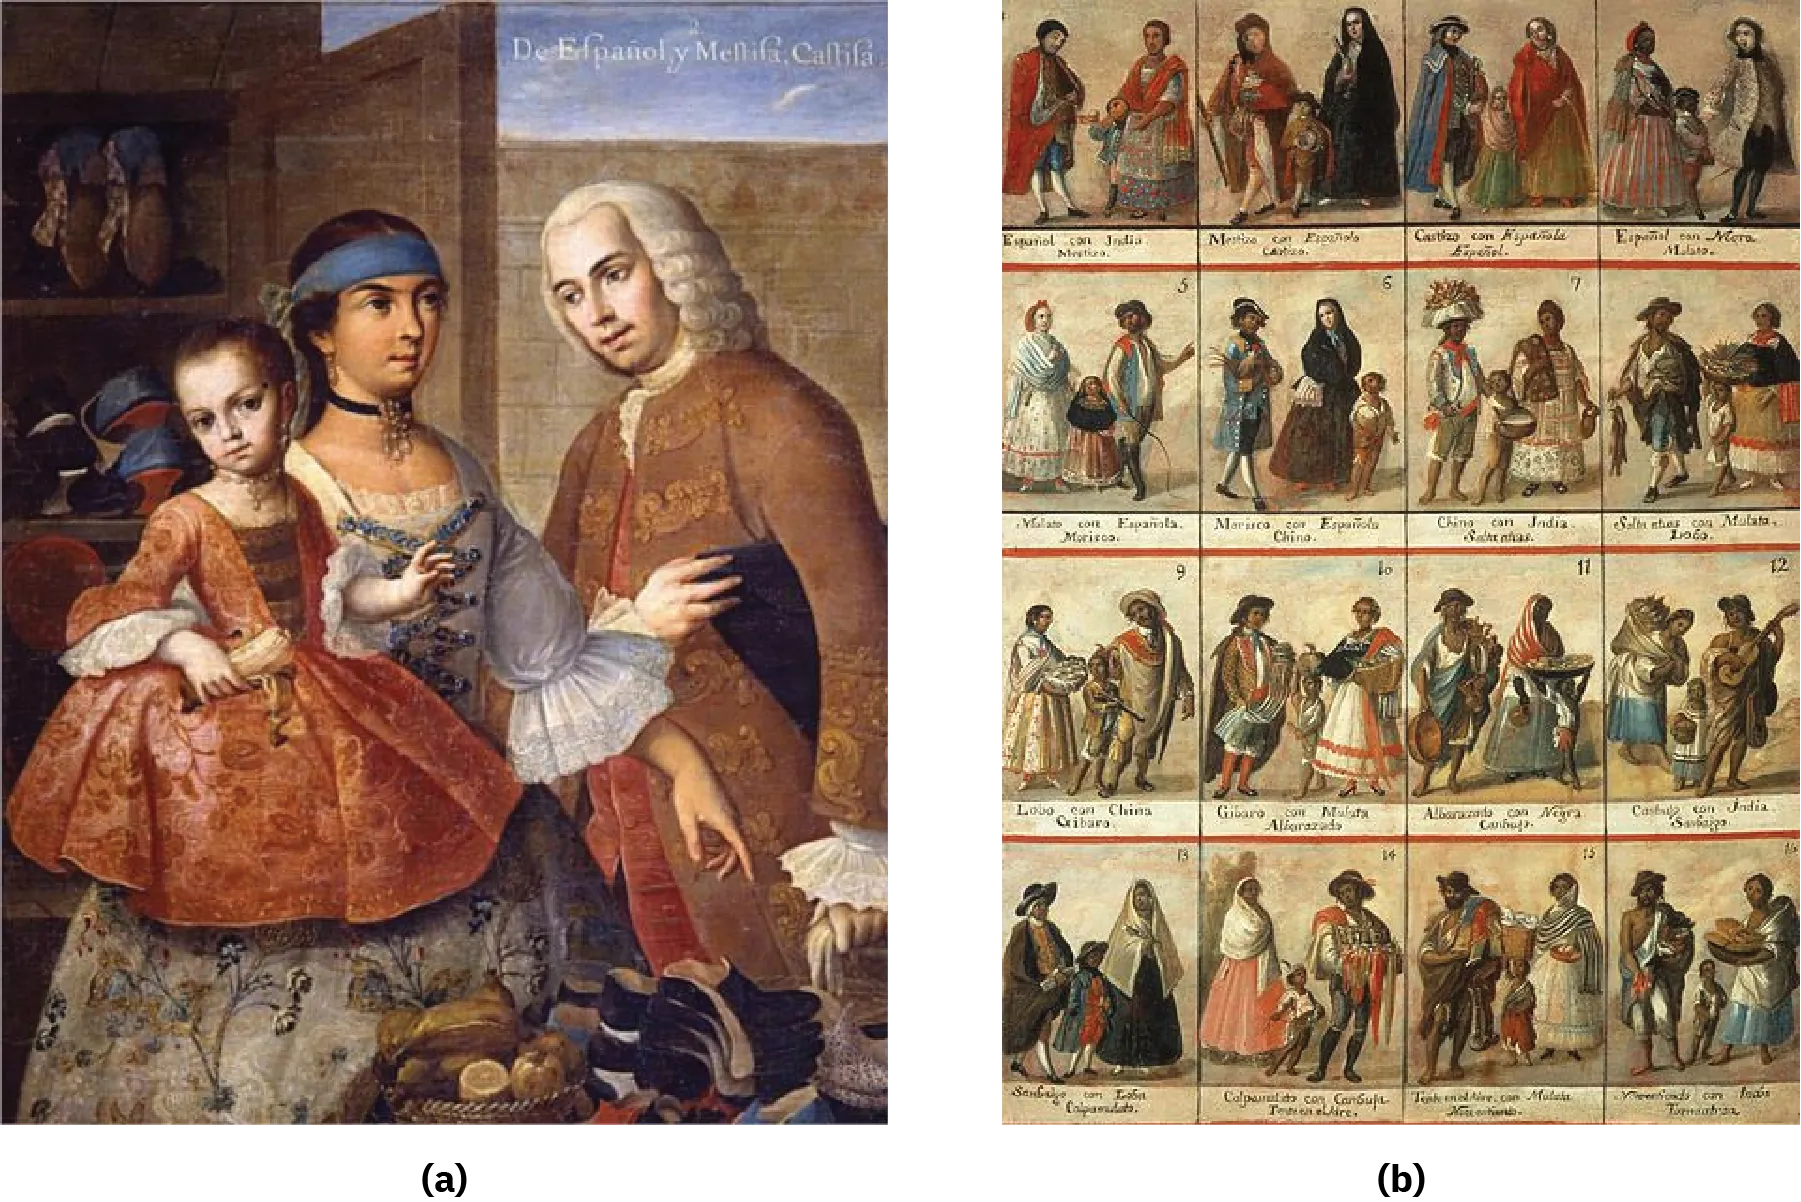 Image (a) shows a white father with his Spanish Indian wife and their mixed-race daughter. The man wears shirt, vest, and a long coat, decorated with embroidery, and oversized lace cuffs. The mother and child both wear jewelry and dresses decorated with floral embroidery. Image (b) consists of sixteen small paintings. Each painting shows a different racial combination of a man, woman, and child.